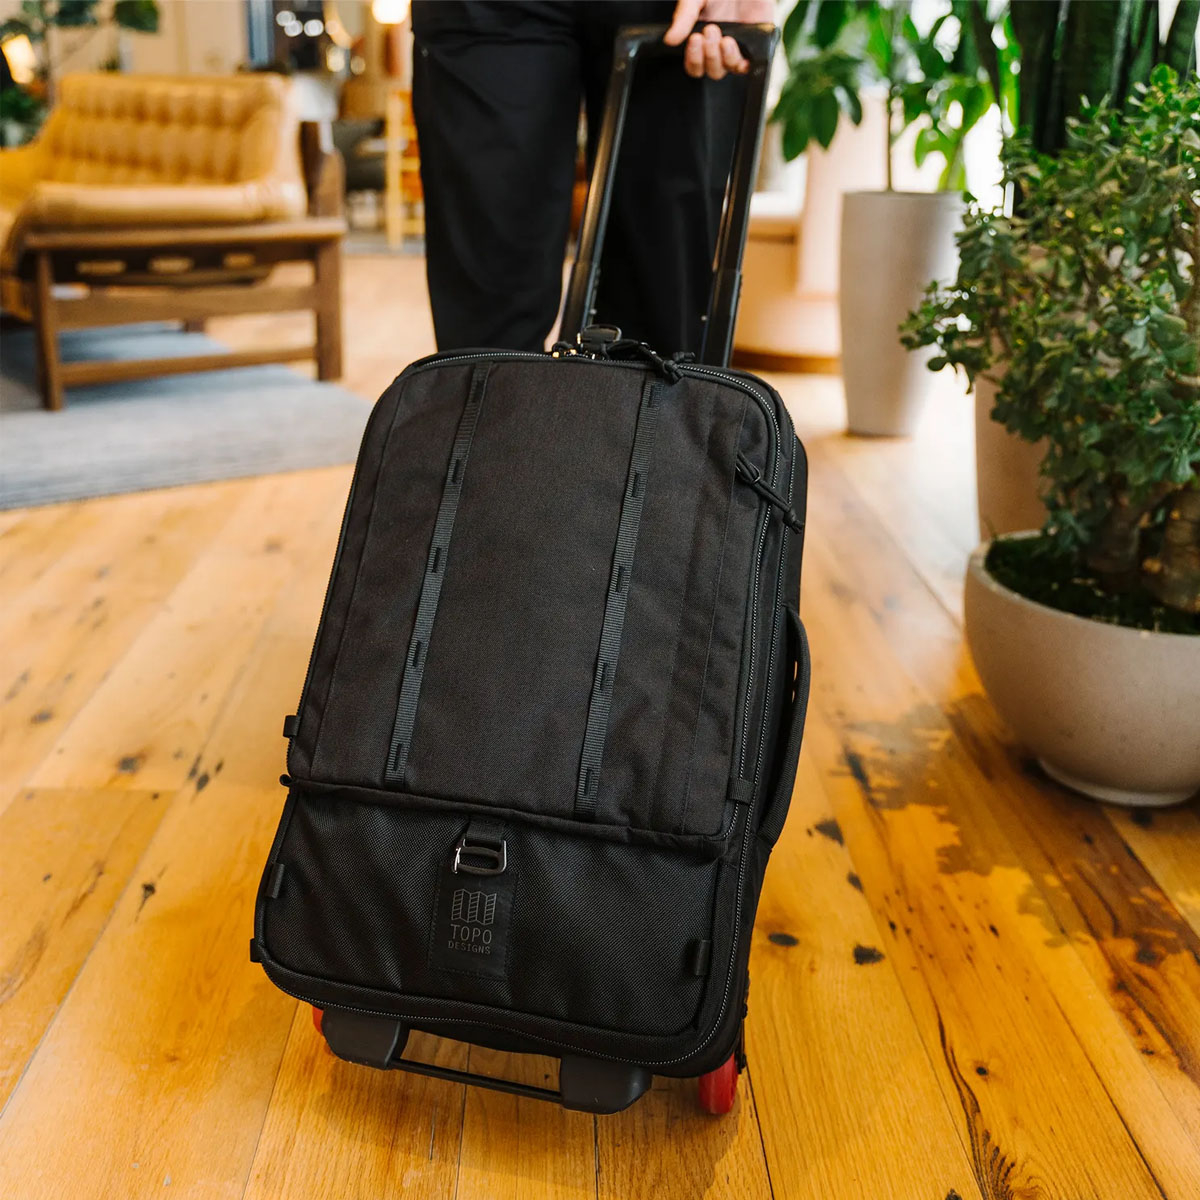 Topo Designs Global Travel Bag Roller, built to travel as easy as possible